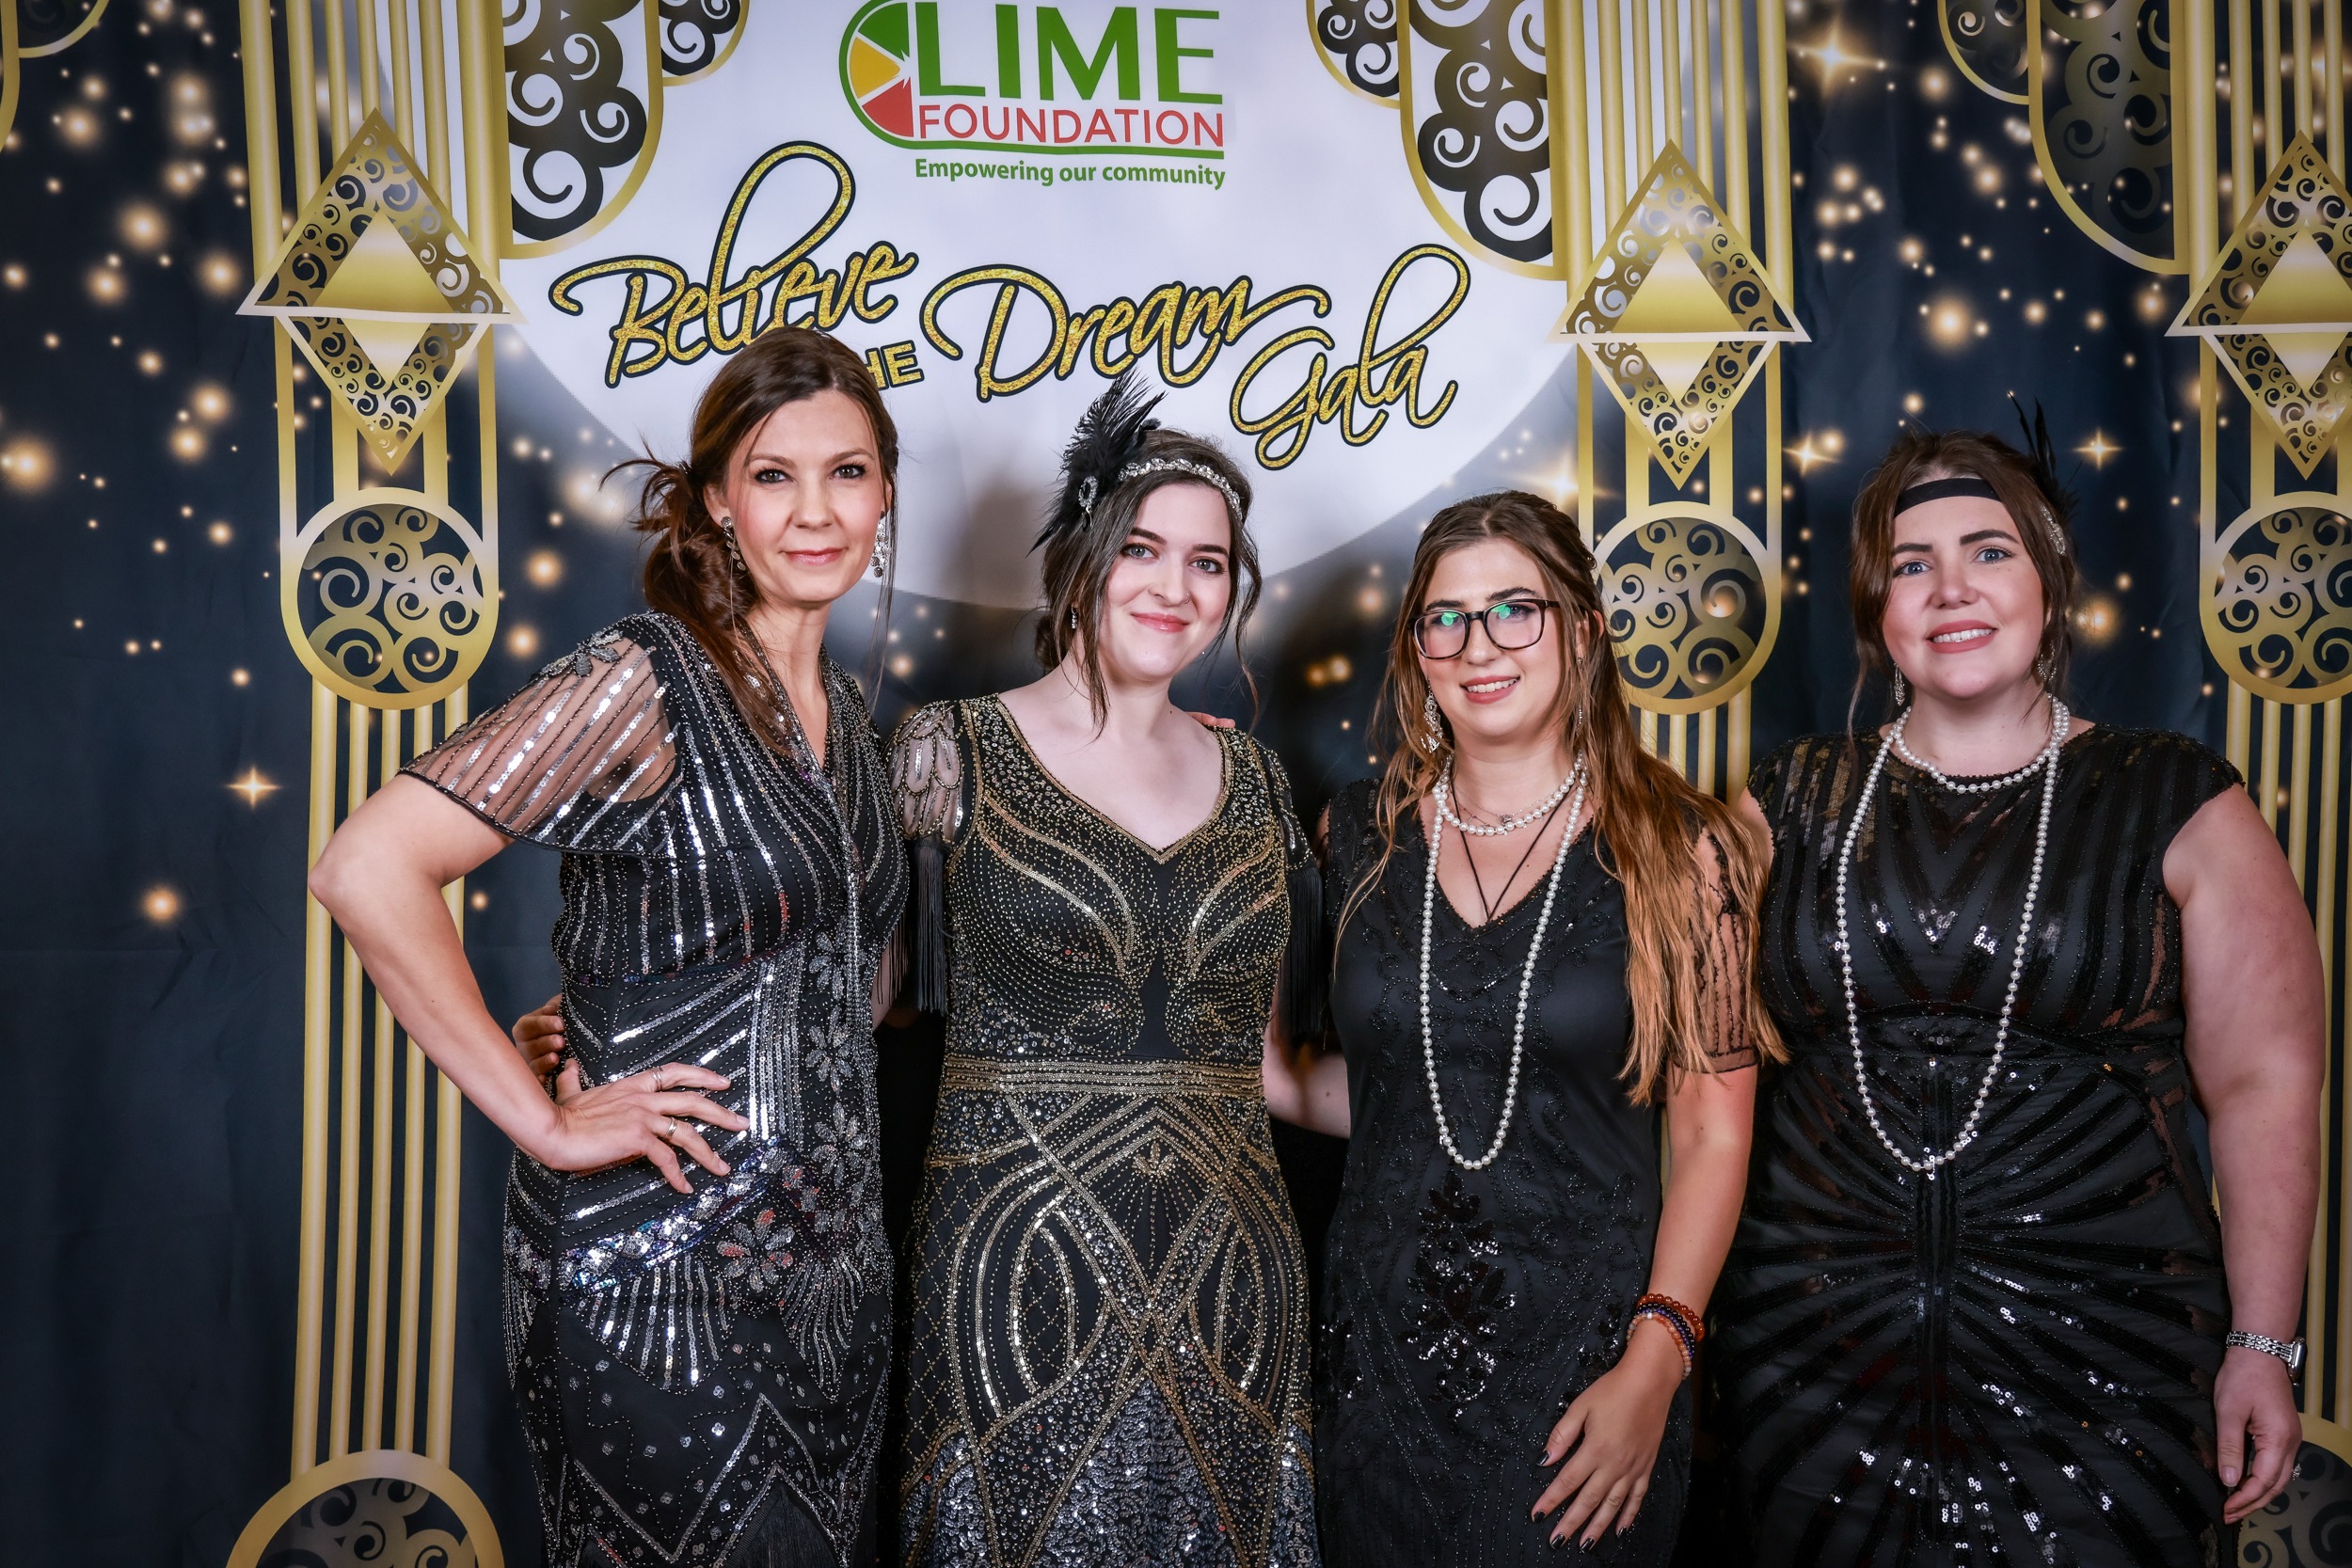 A group of women posing for a photo at a 1920's themed party hosted by The LIME Foundation of Santa Rosa.